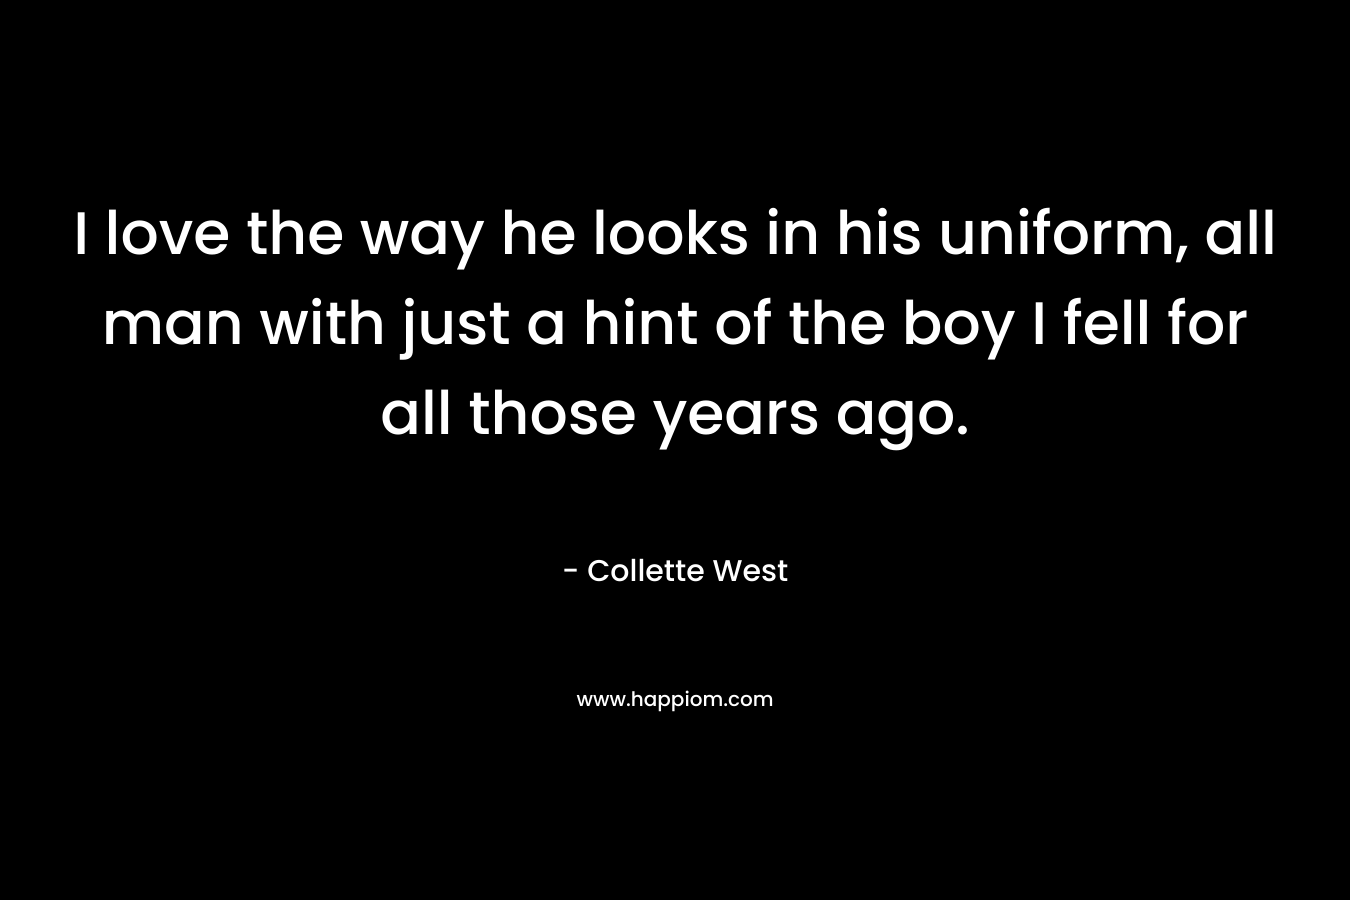 I love the way he looks in his uniform, all man with just a hint of the boy I fell for all those years ago. – Collette West